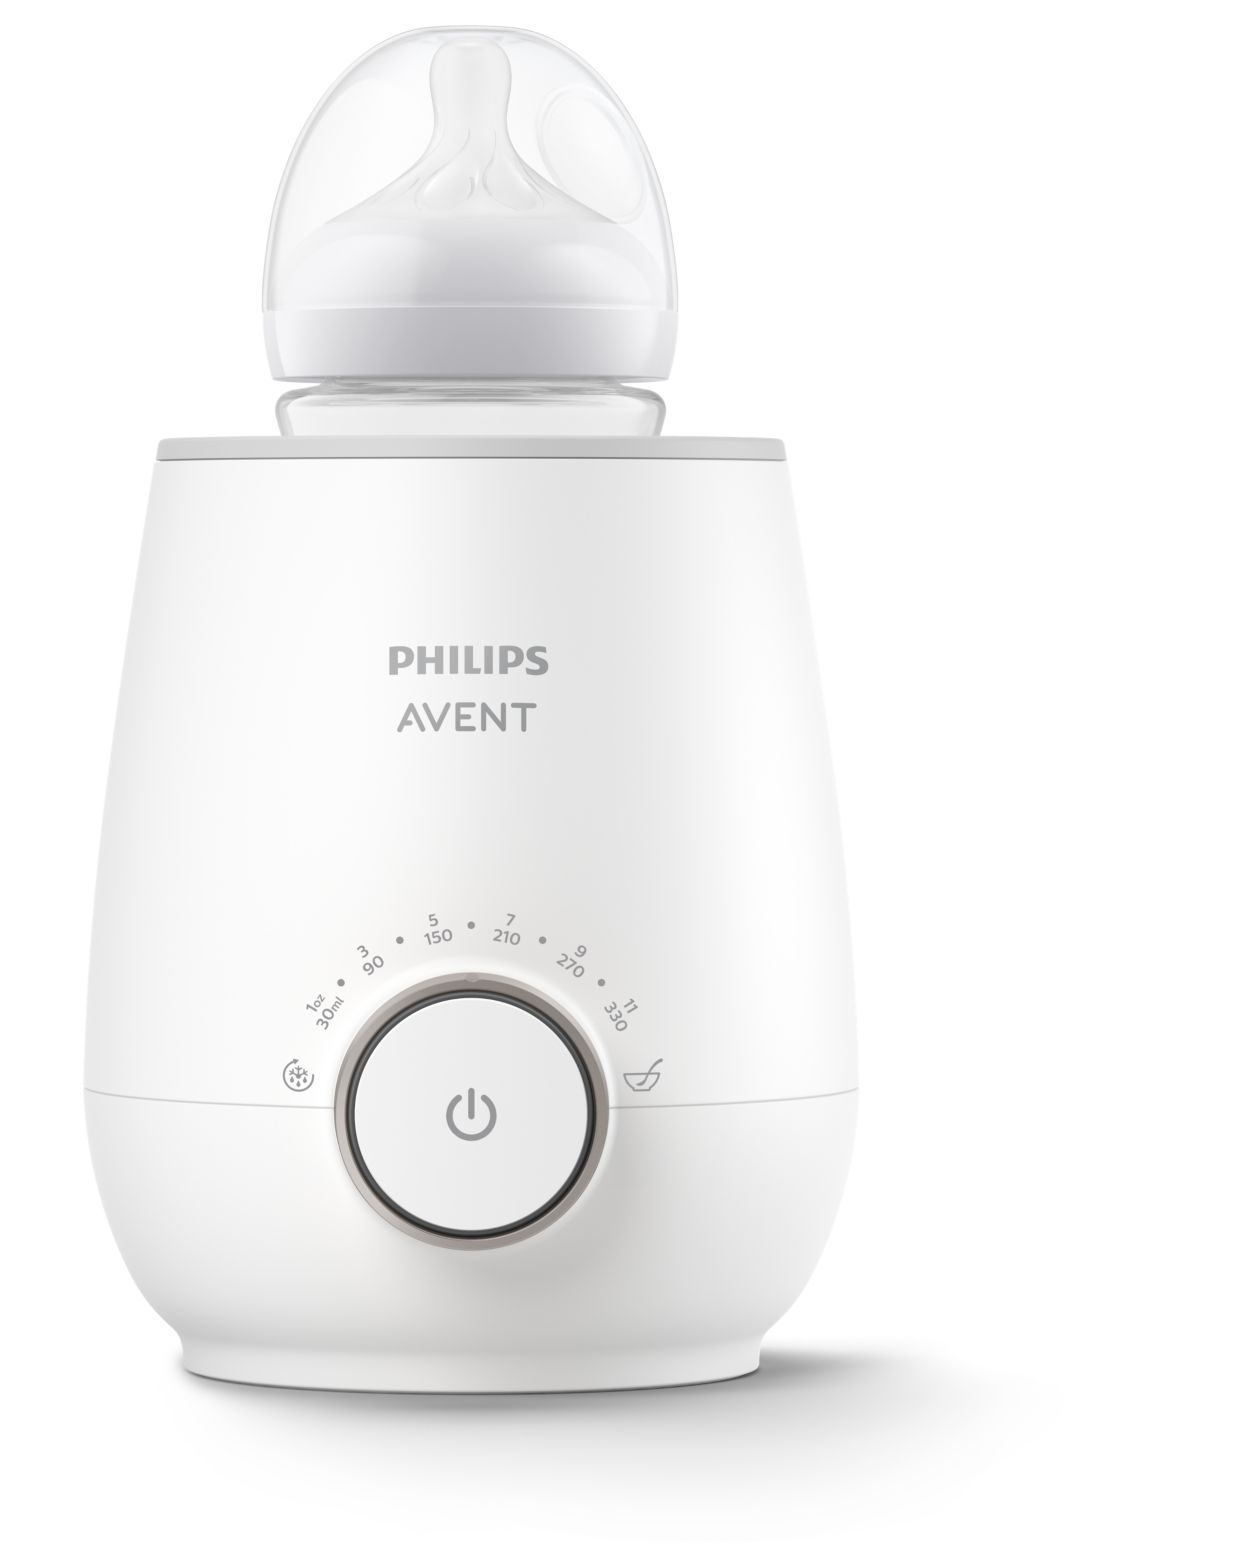 https://images.philips.com/is/image/philipsconsumer/aded9a4de0ff404aae3aaf3a01223114?$jpglarge$&wid=1250